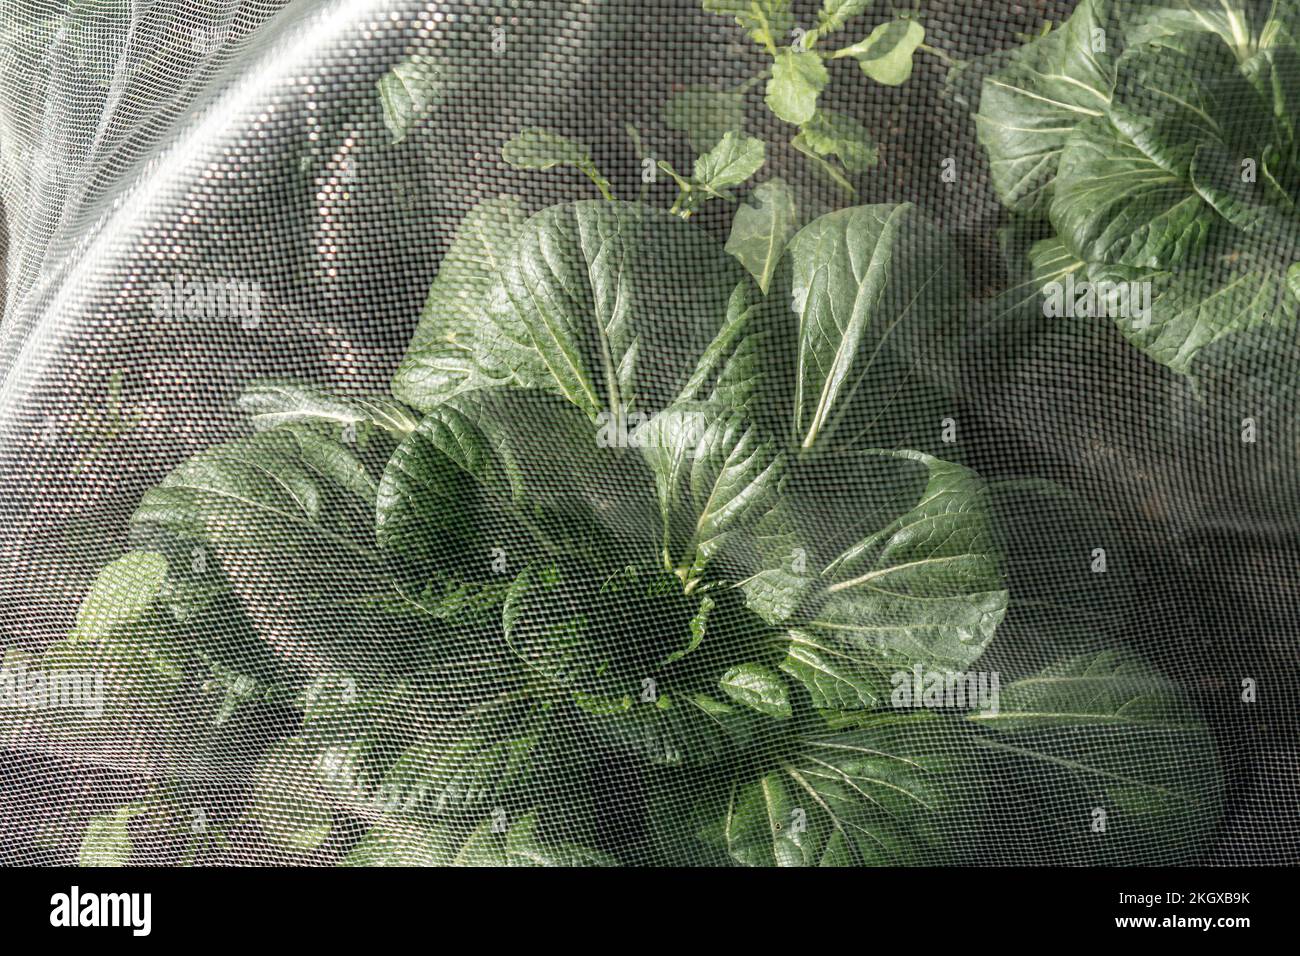 Pak Choi ‘Yuushou’ under anti-bug mesh net netting, Pak Choi an all year round vegetable, popular with its use in oriental stir-fries and salads. Stock Photo